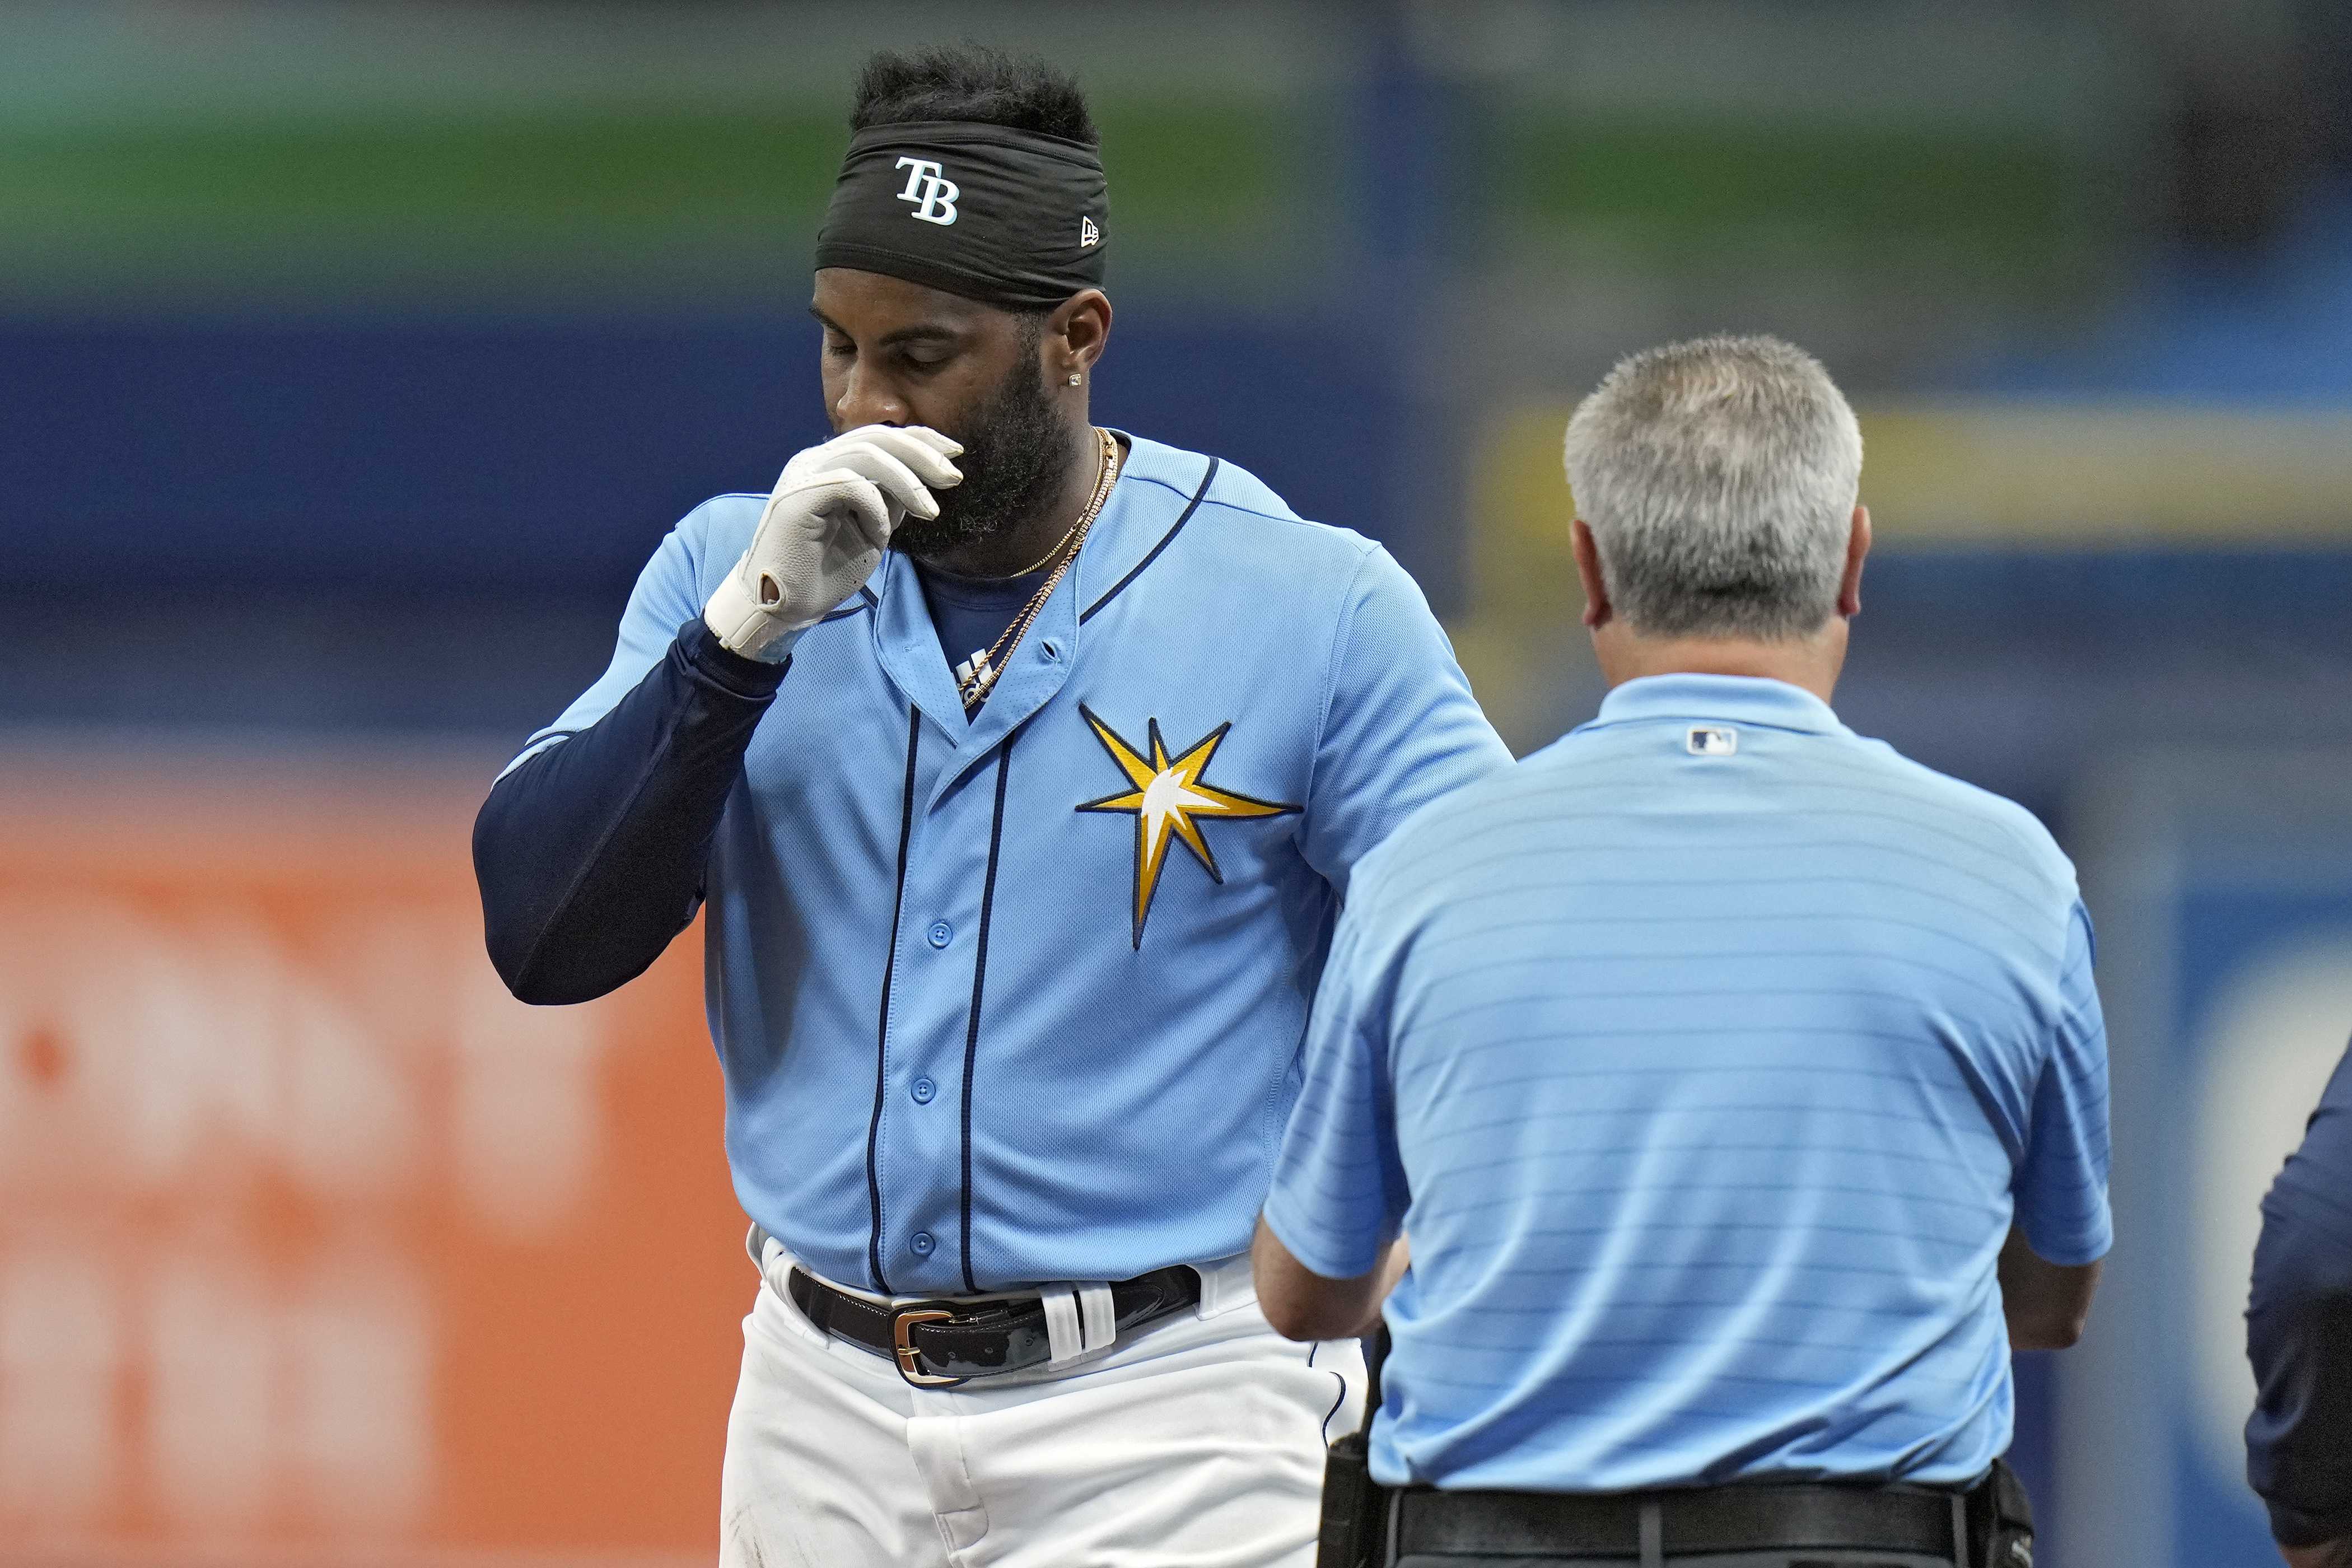 Mets' Starling Marte has core muscle surgery, expected to be ready for  spring training